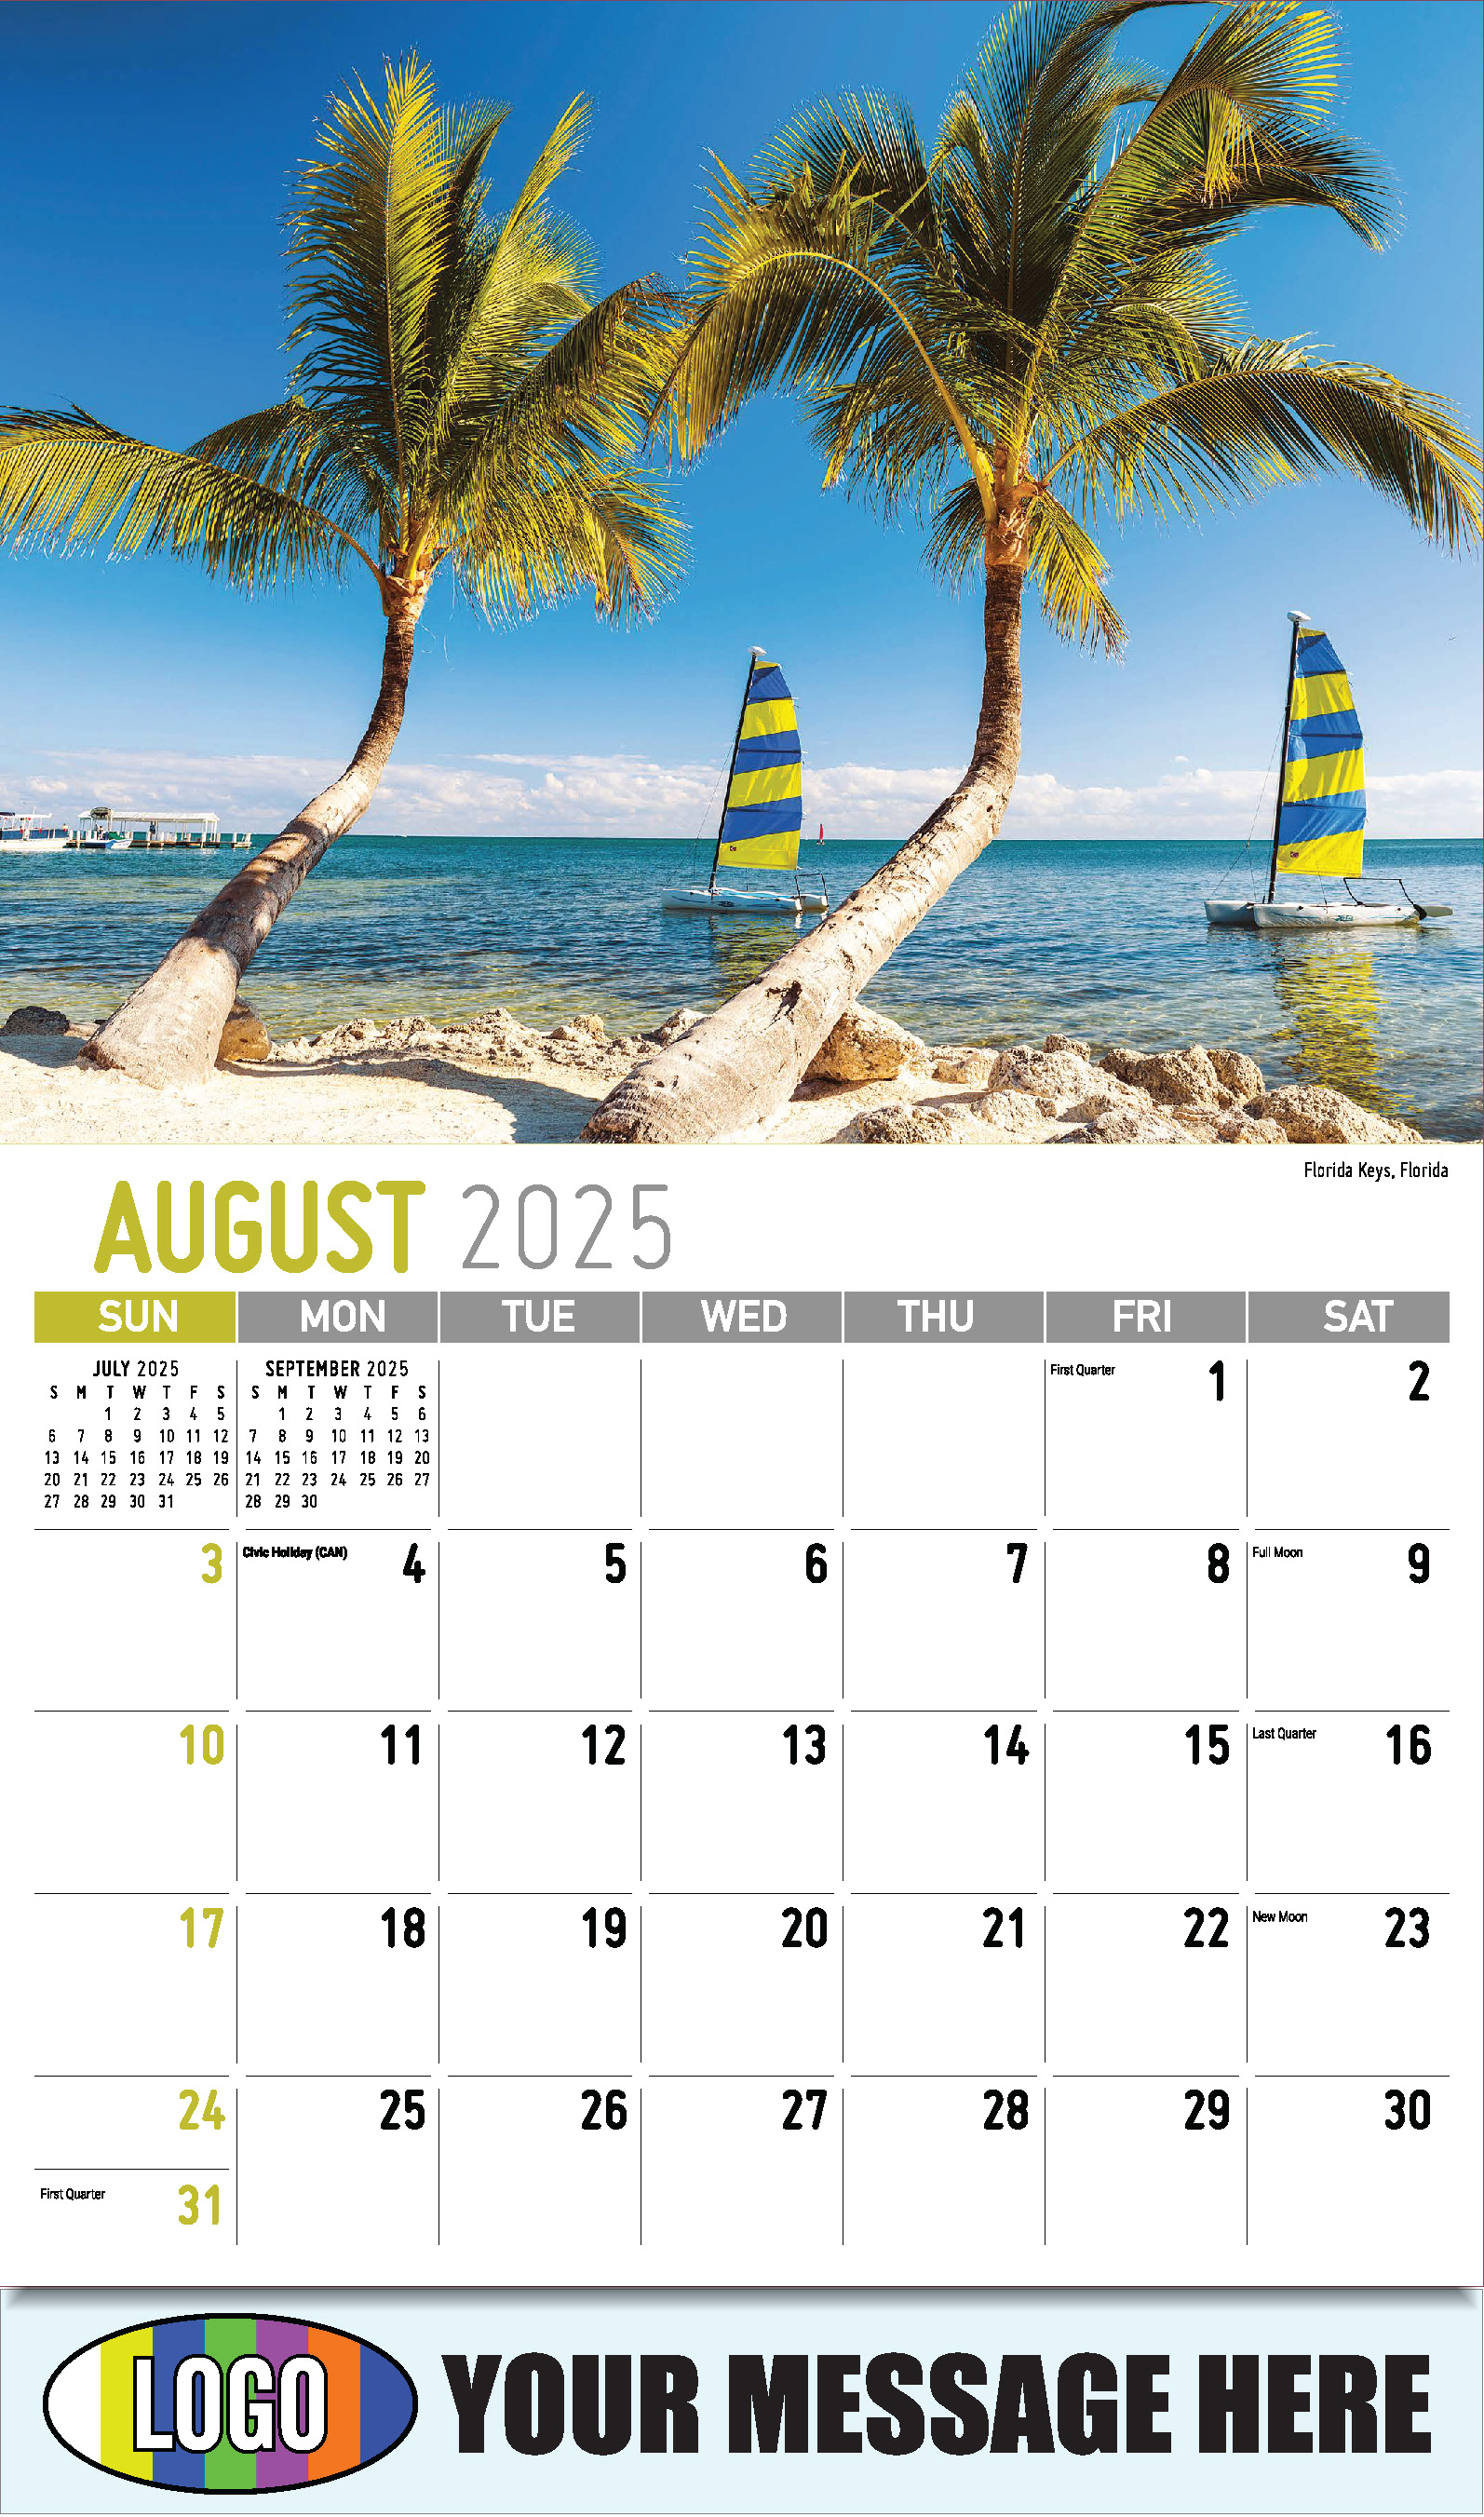 Scenes of Southeast USA 2025 Business Promo Wall Calendar - August